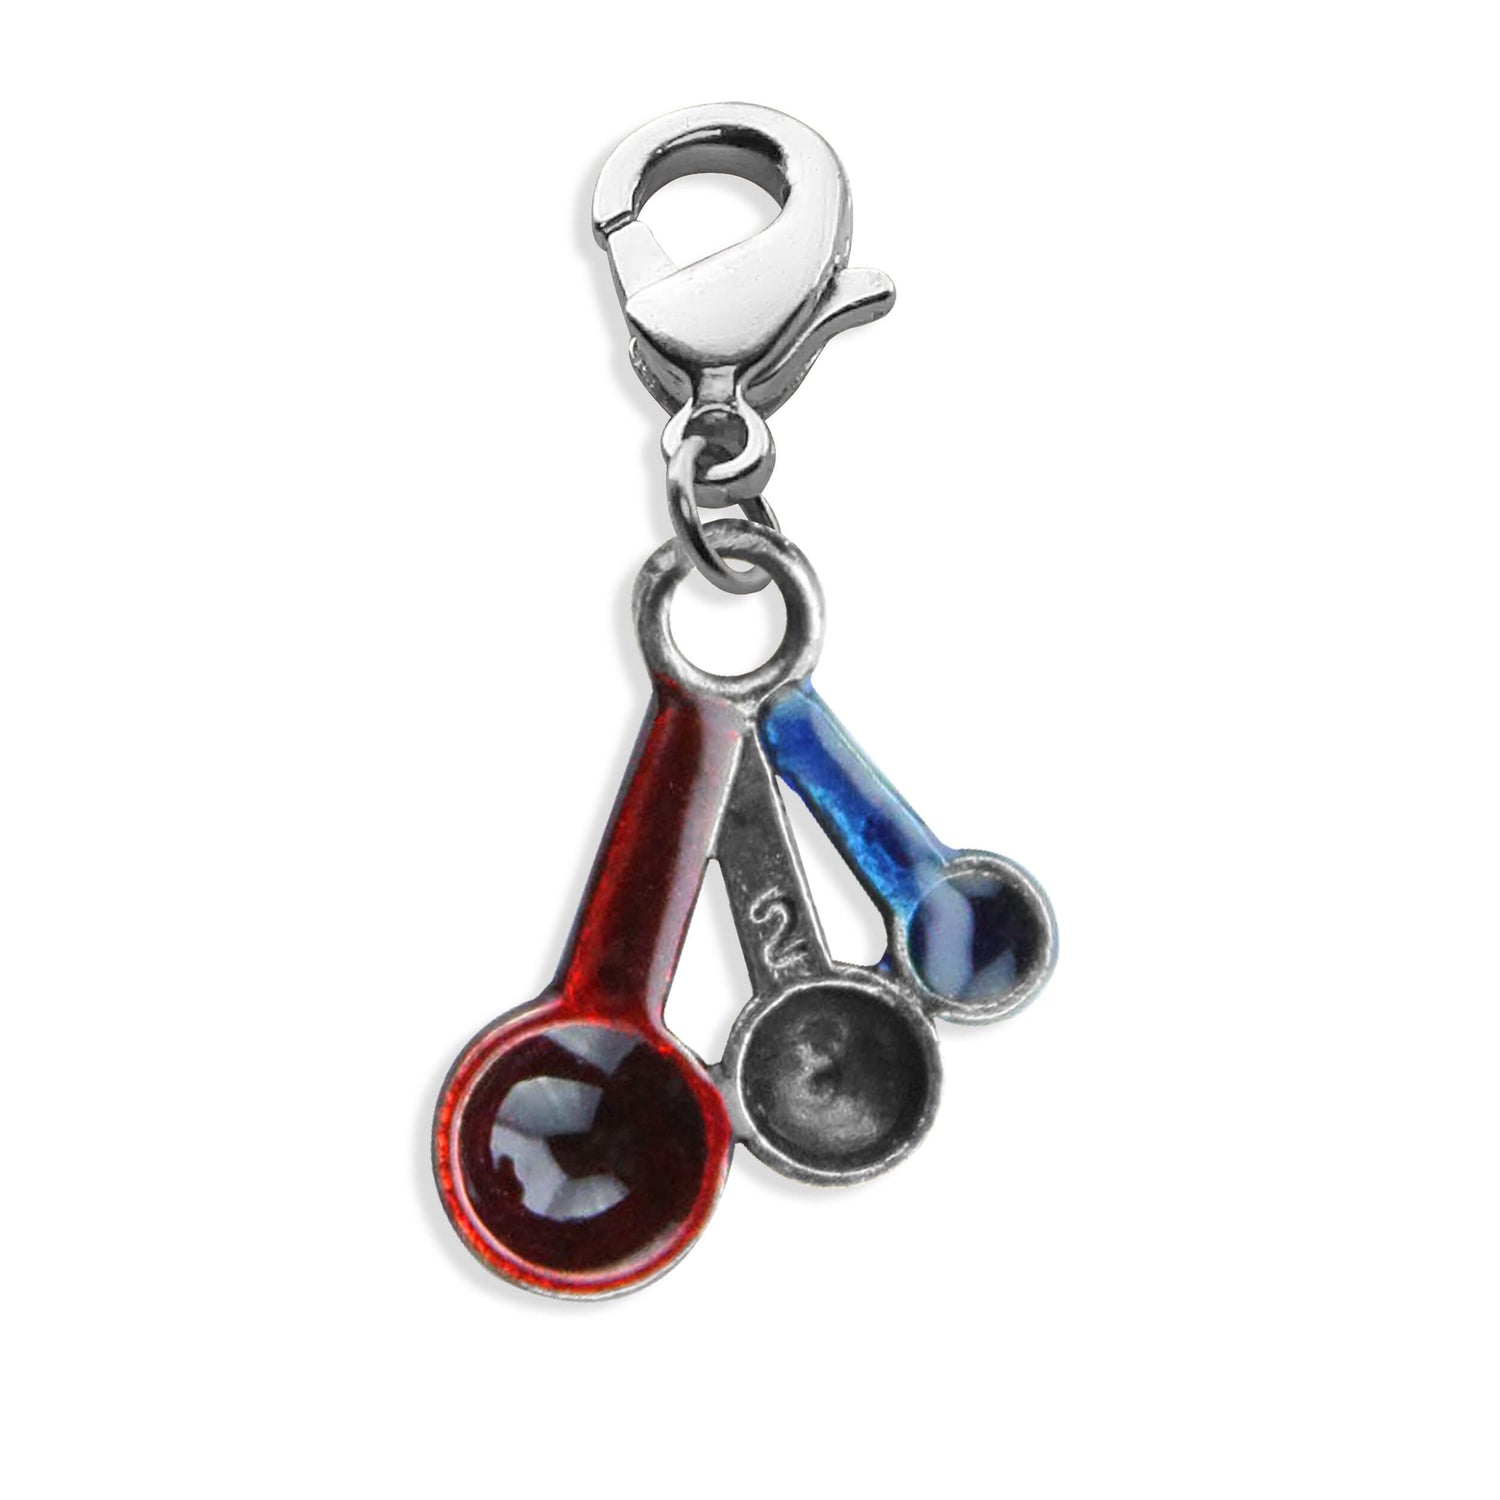 Whimsical Gifts | Measuring Spoons Charm Dangle in Silver Finish | Hobbies & Special Interests | Chef | Cooking | Baking Charm Dangle